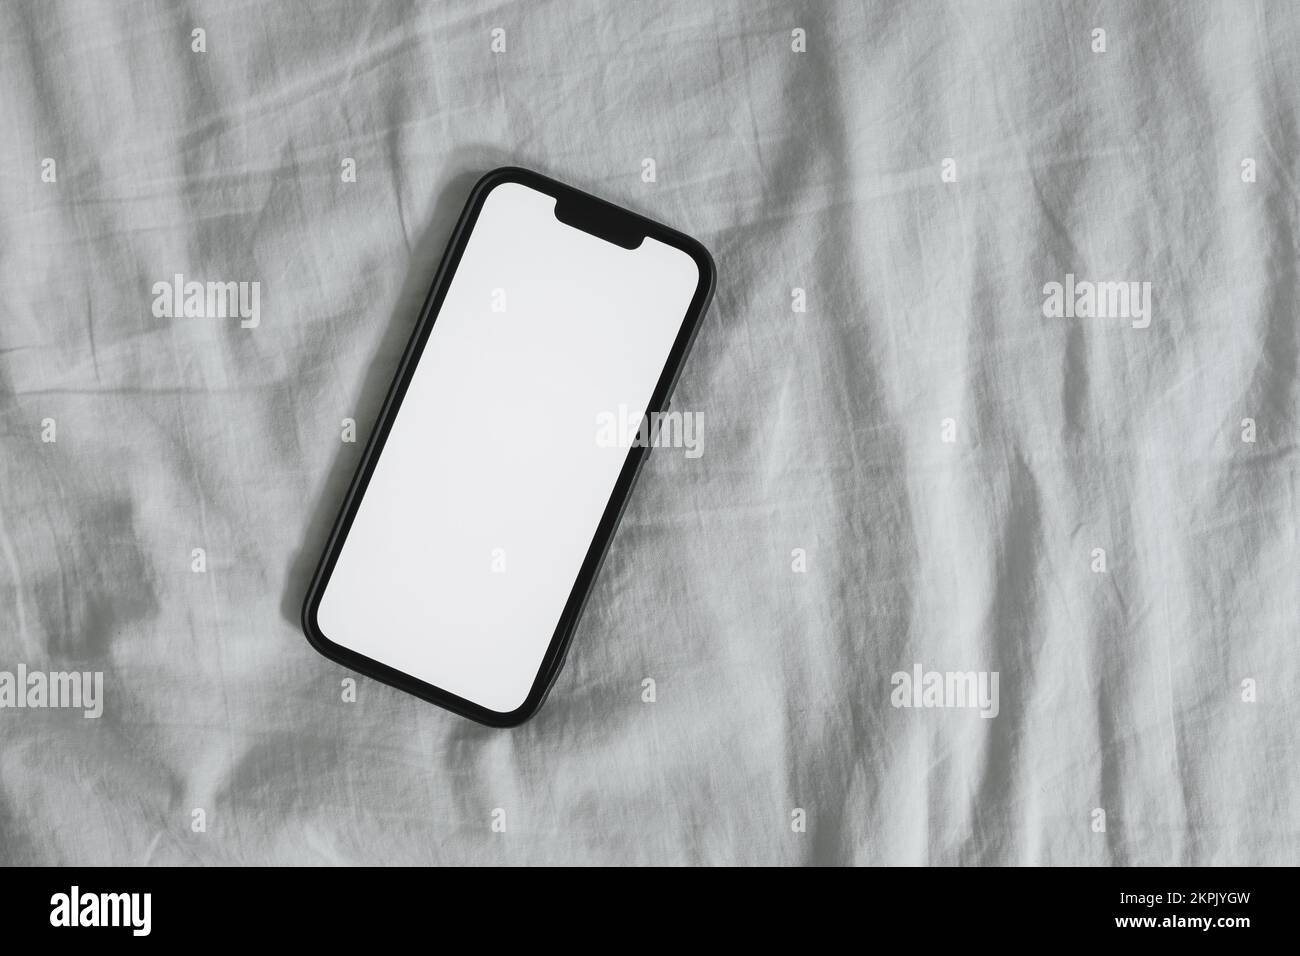 Smart mobile phone with blank mockup screen on wrinkled bed linen, top view Stock Photo